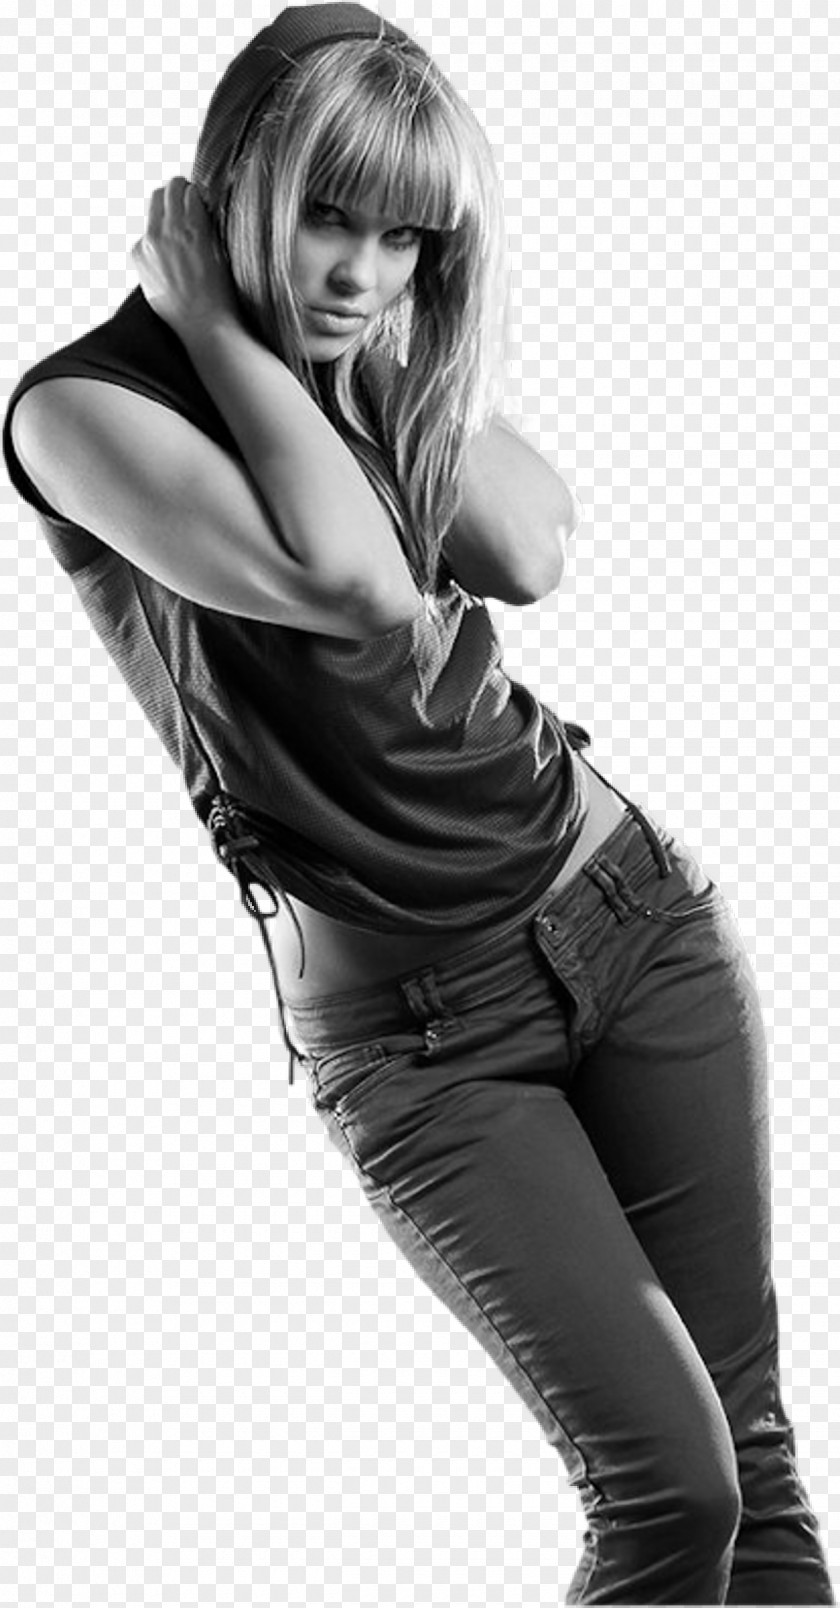 Bay Black And White Woman Monochrome Photography PNG